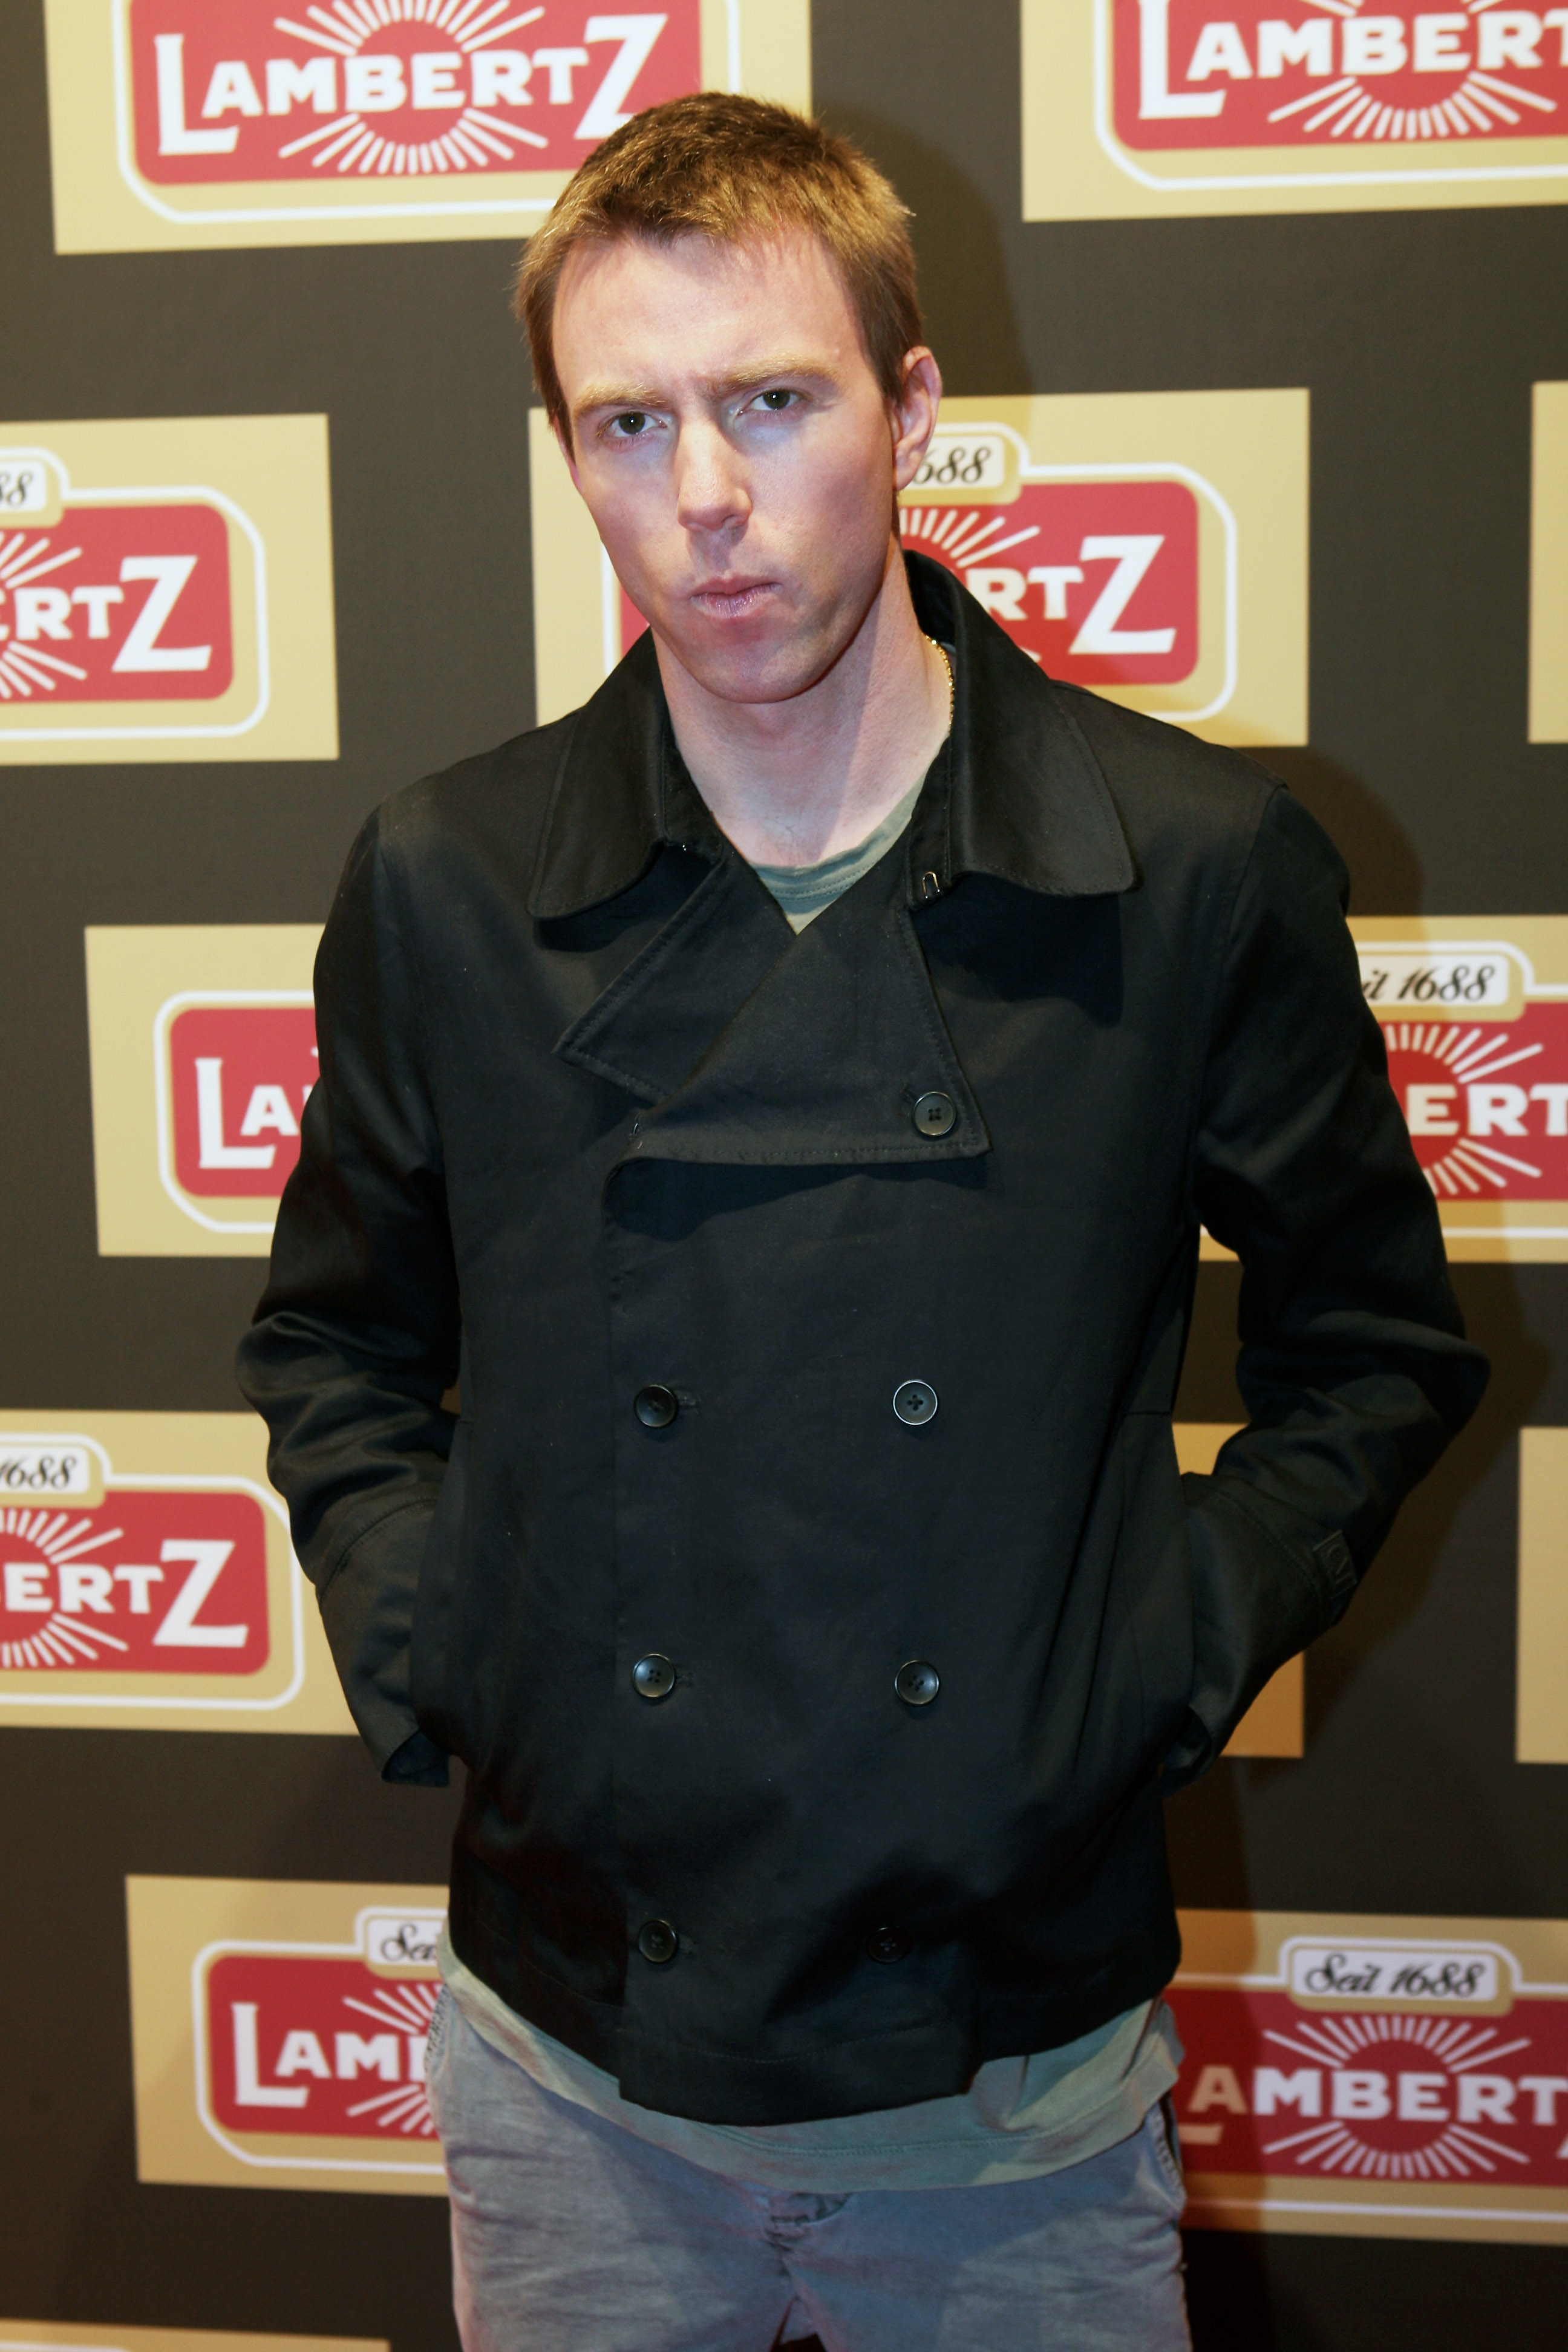 Elijah Blue Allman at the "Lambertz Monday Night" event in Cologne, Germany on January 30, 2012 | Source: Getty Images